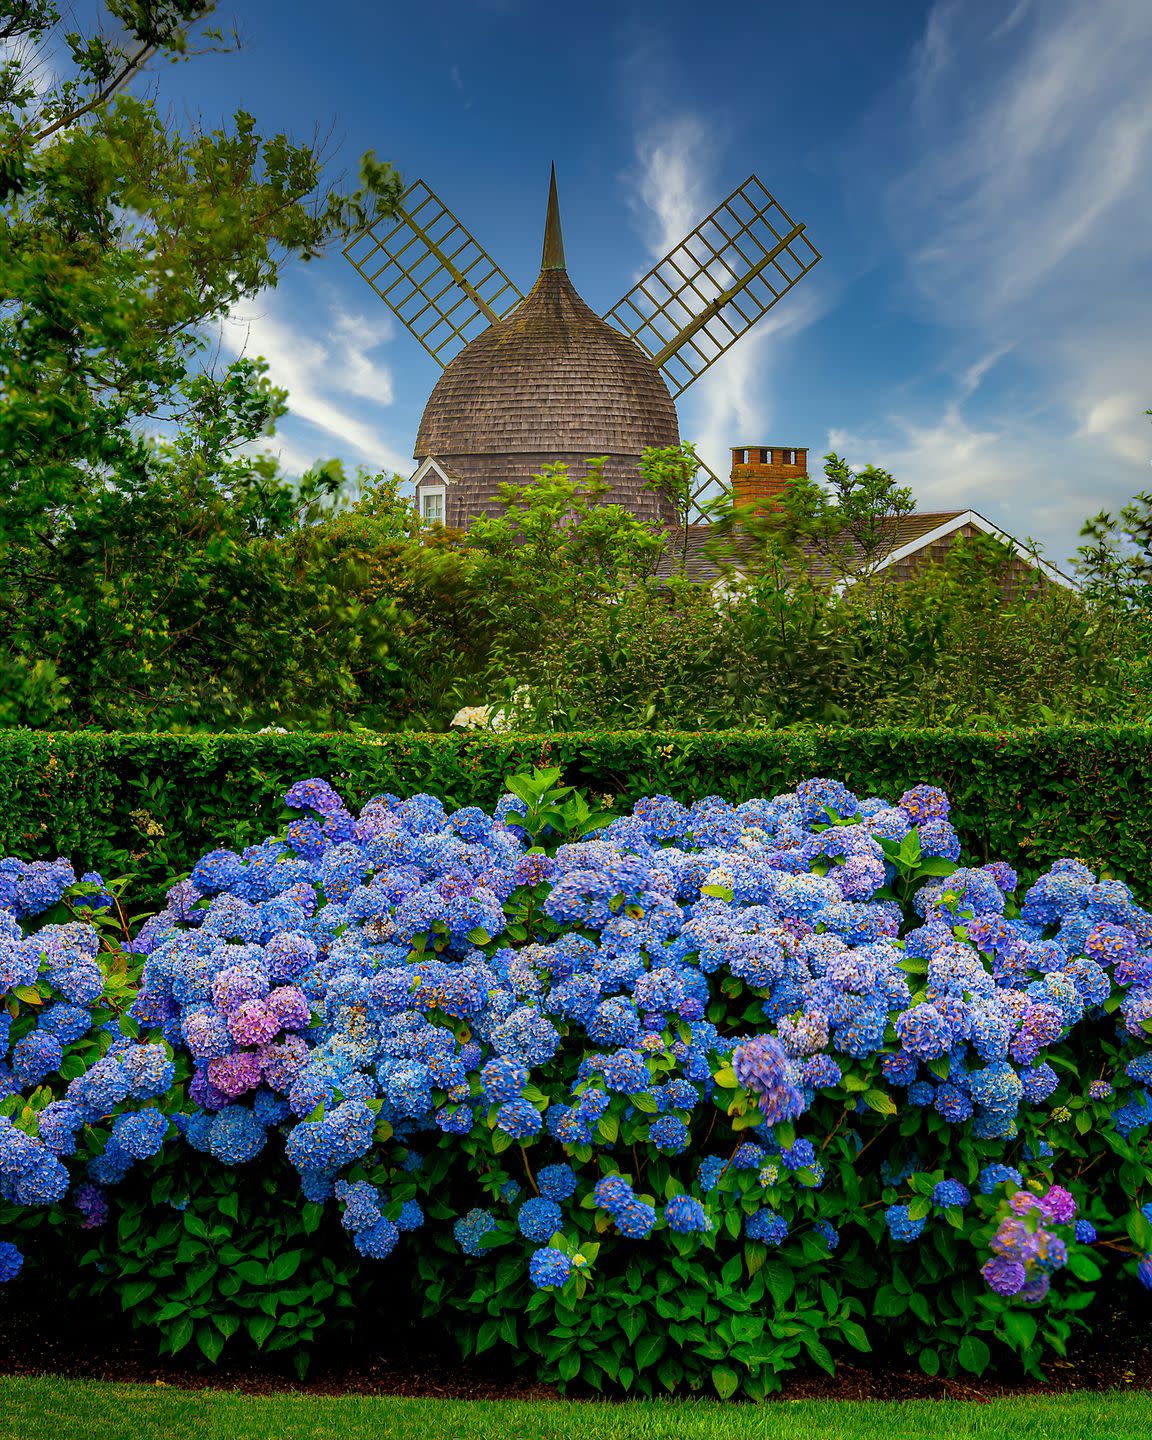 southampton summer scenes with windmill and hydrangea in bloom